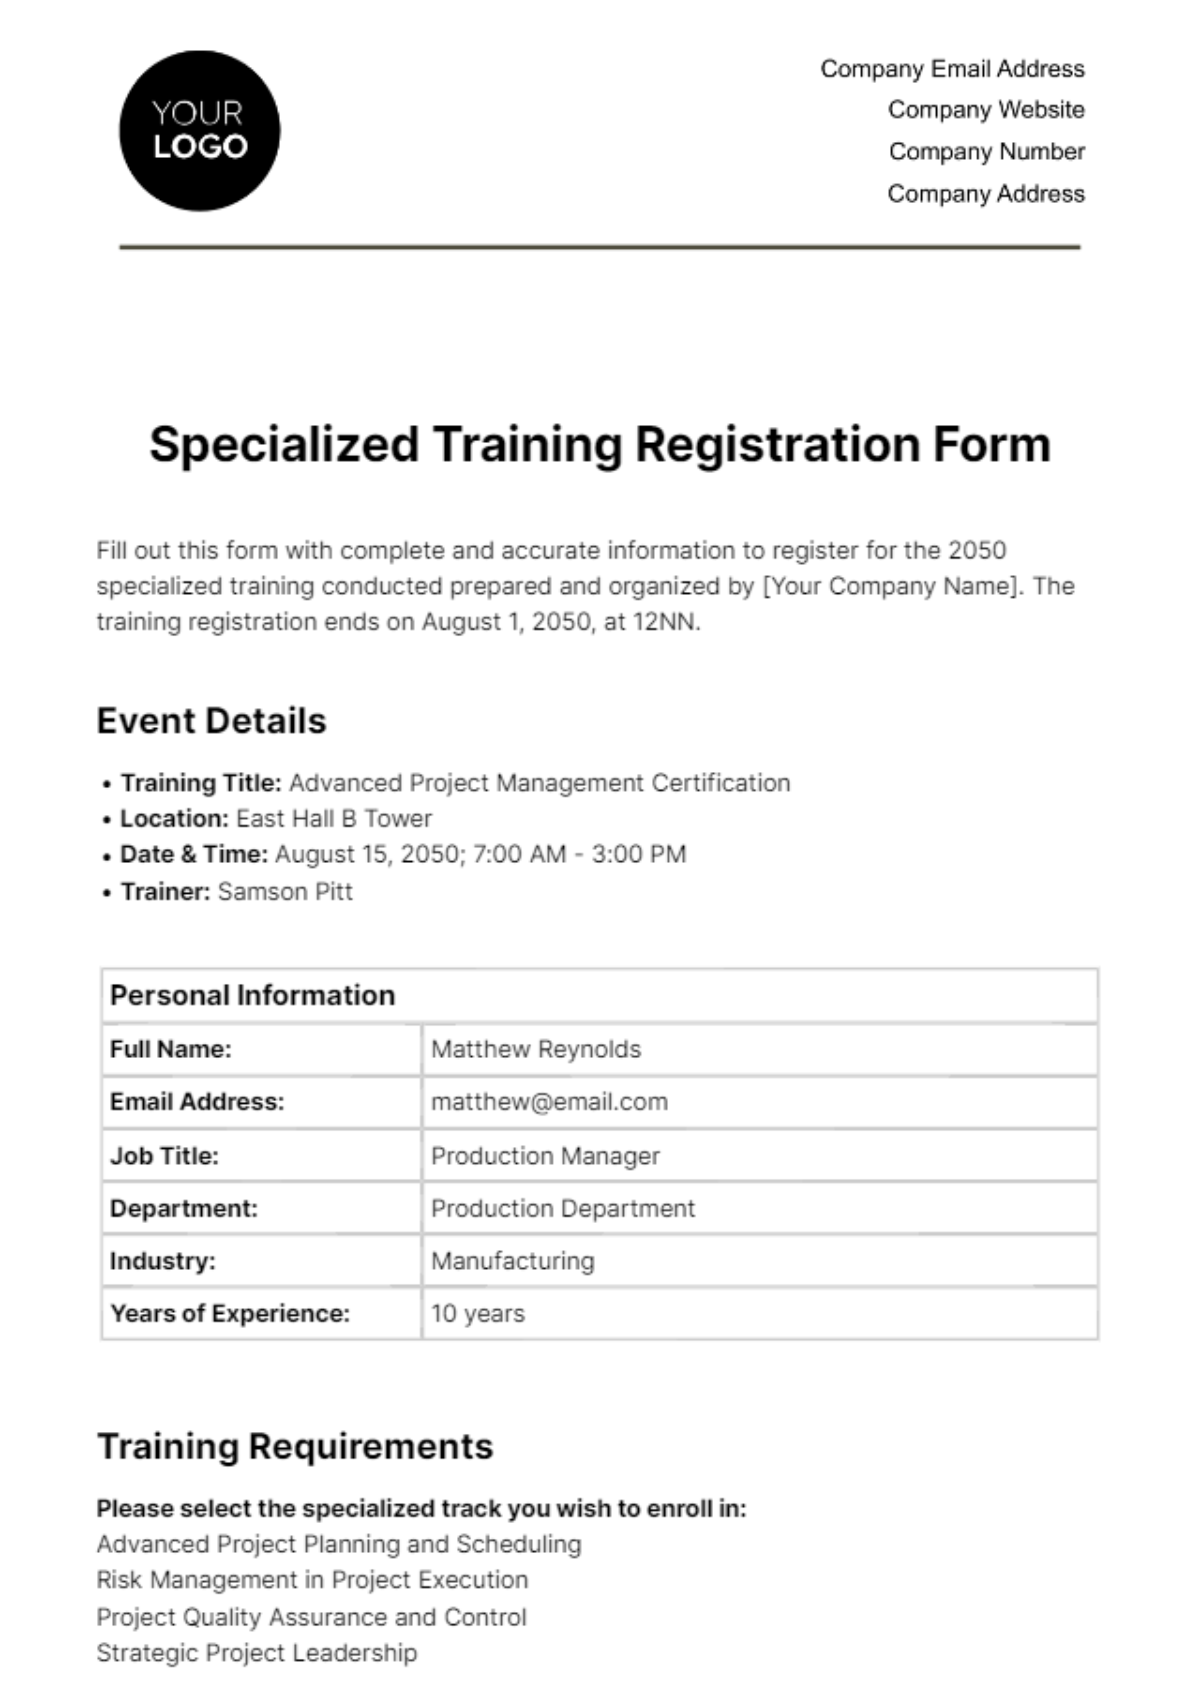 Free Specialized Training Registration Form HR Template